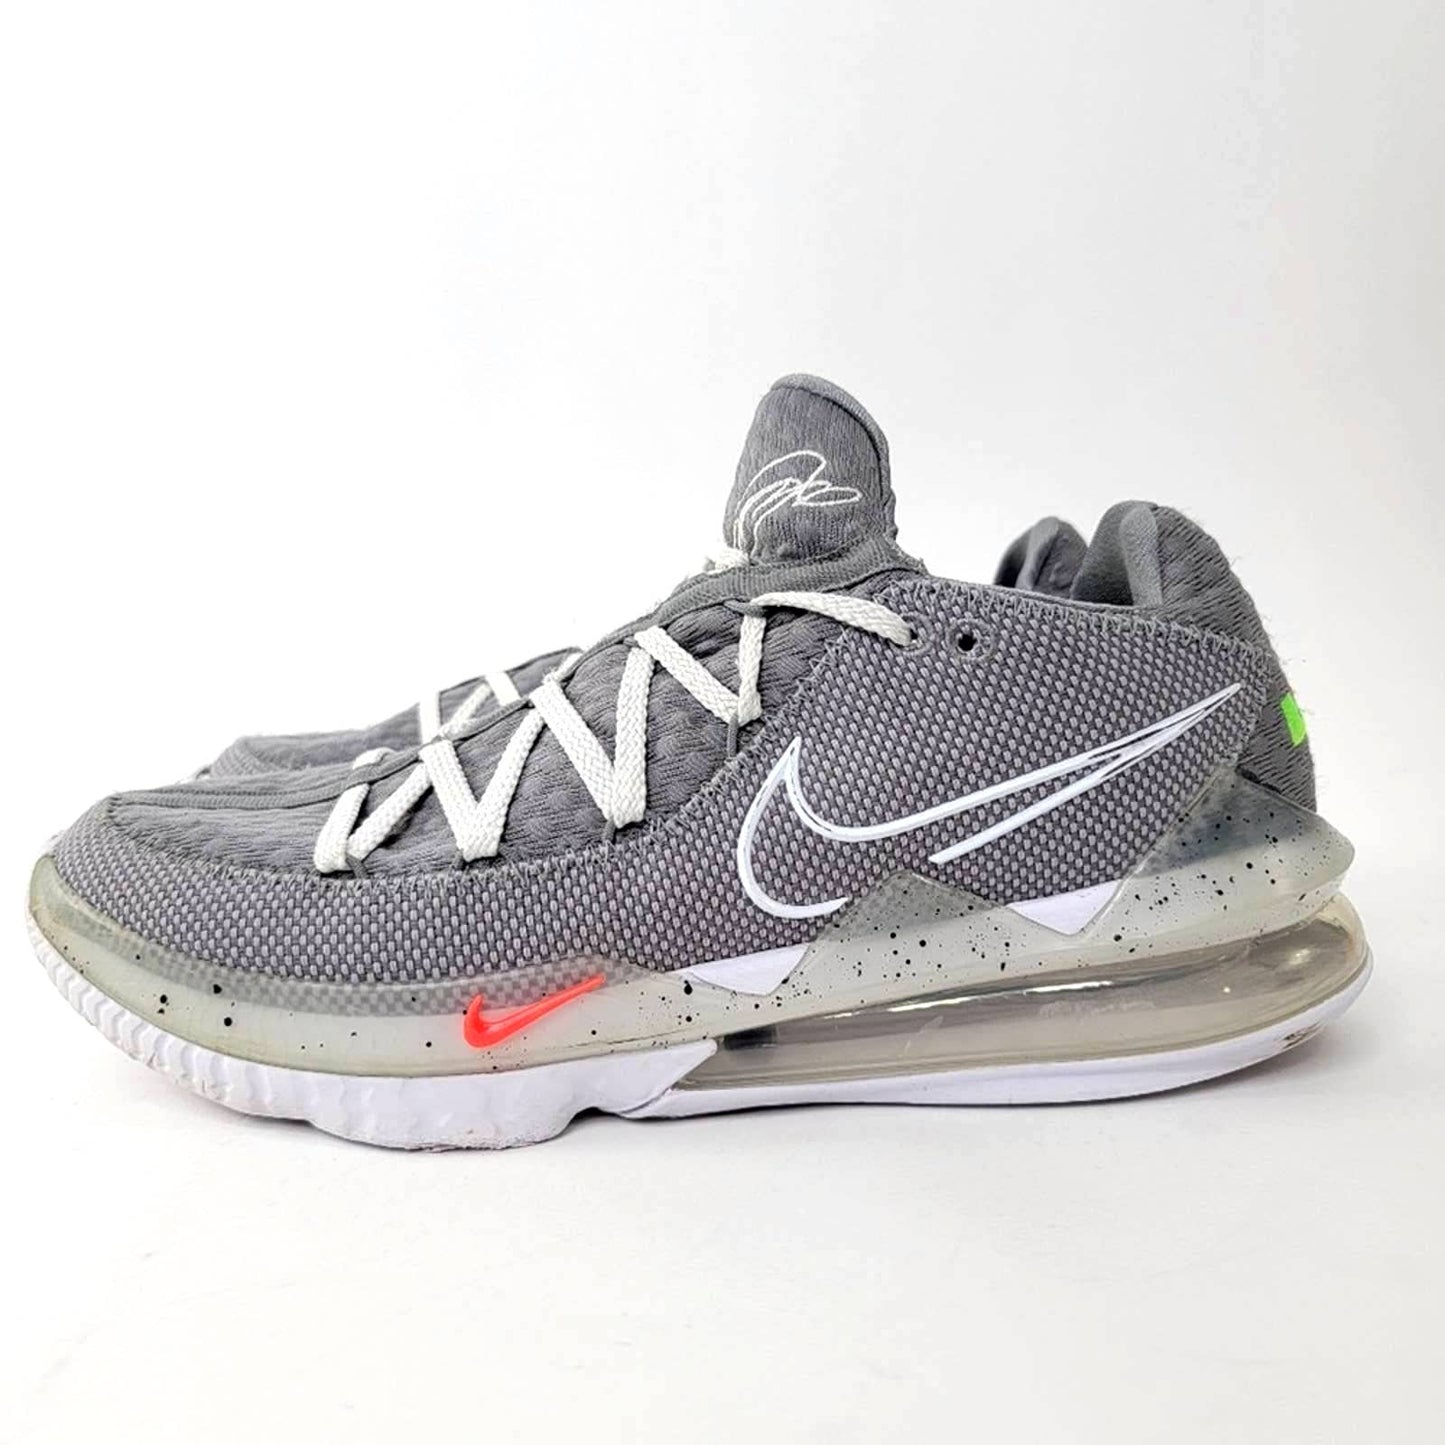 Nike LeBron 17 Low 'Particle Grey' - 10.5